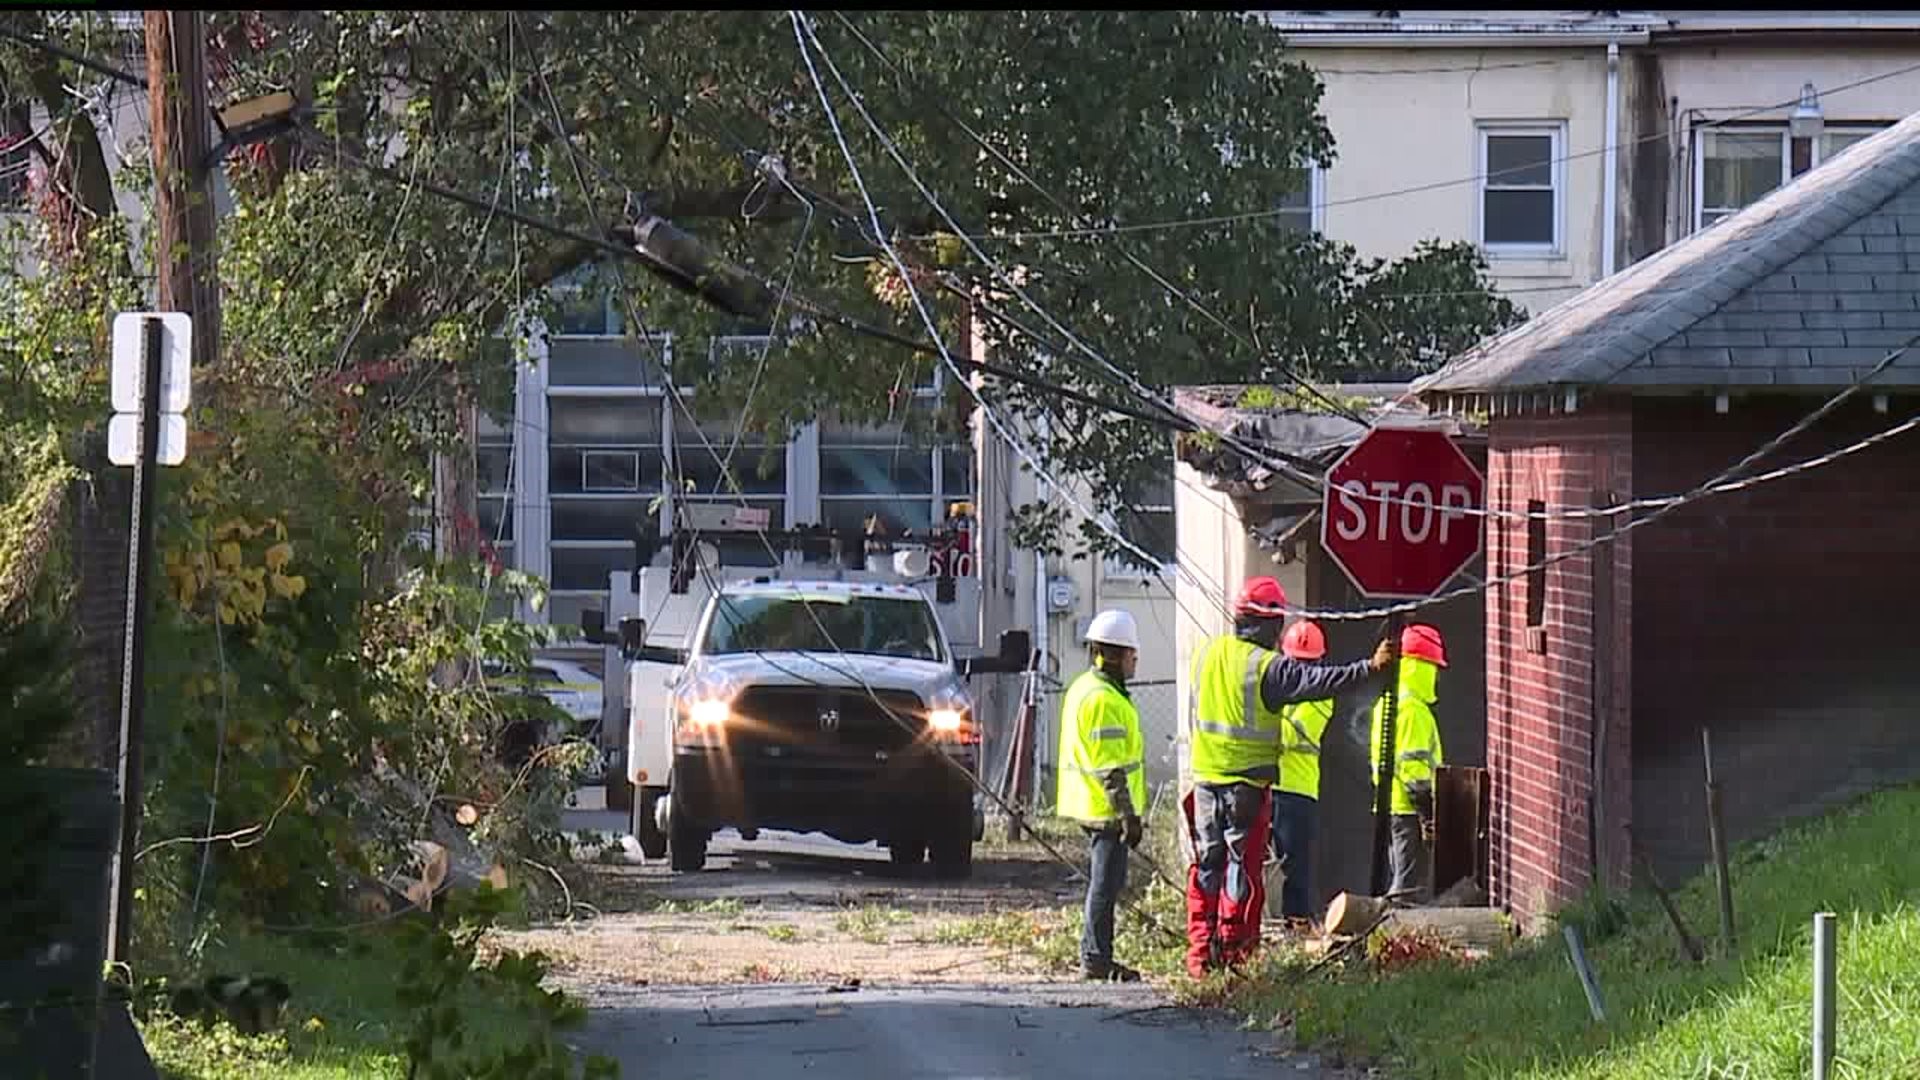 Crews restore power and clear downed trees in Harrisburg after Sunday night storm